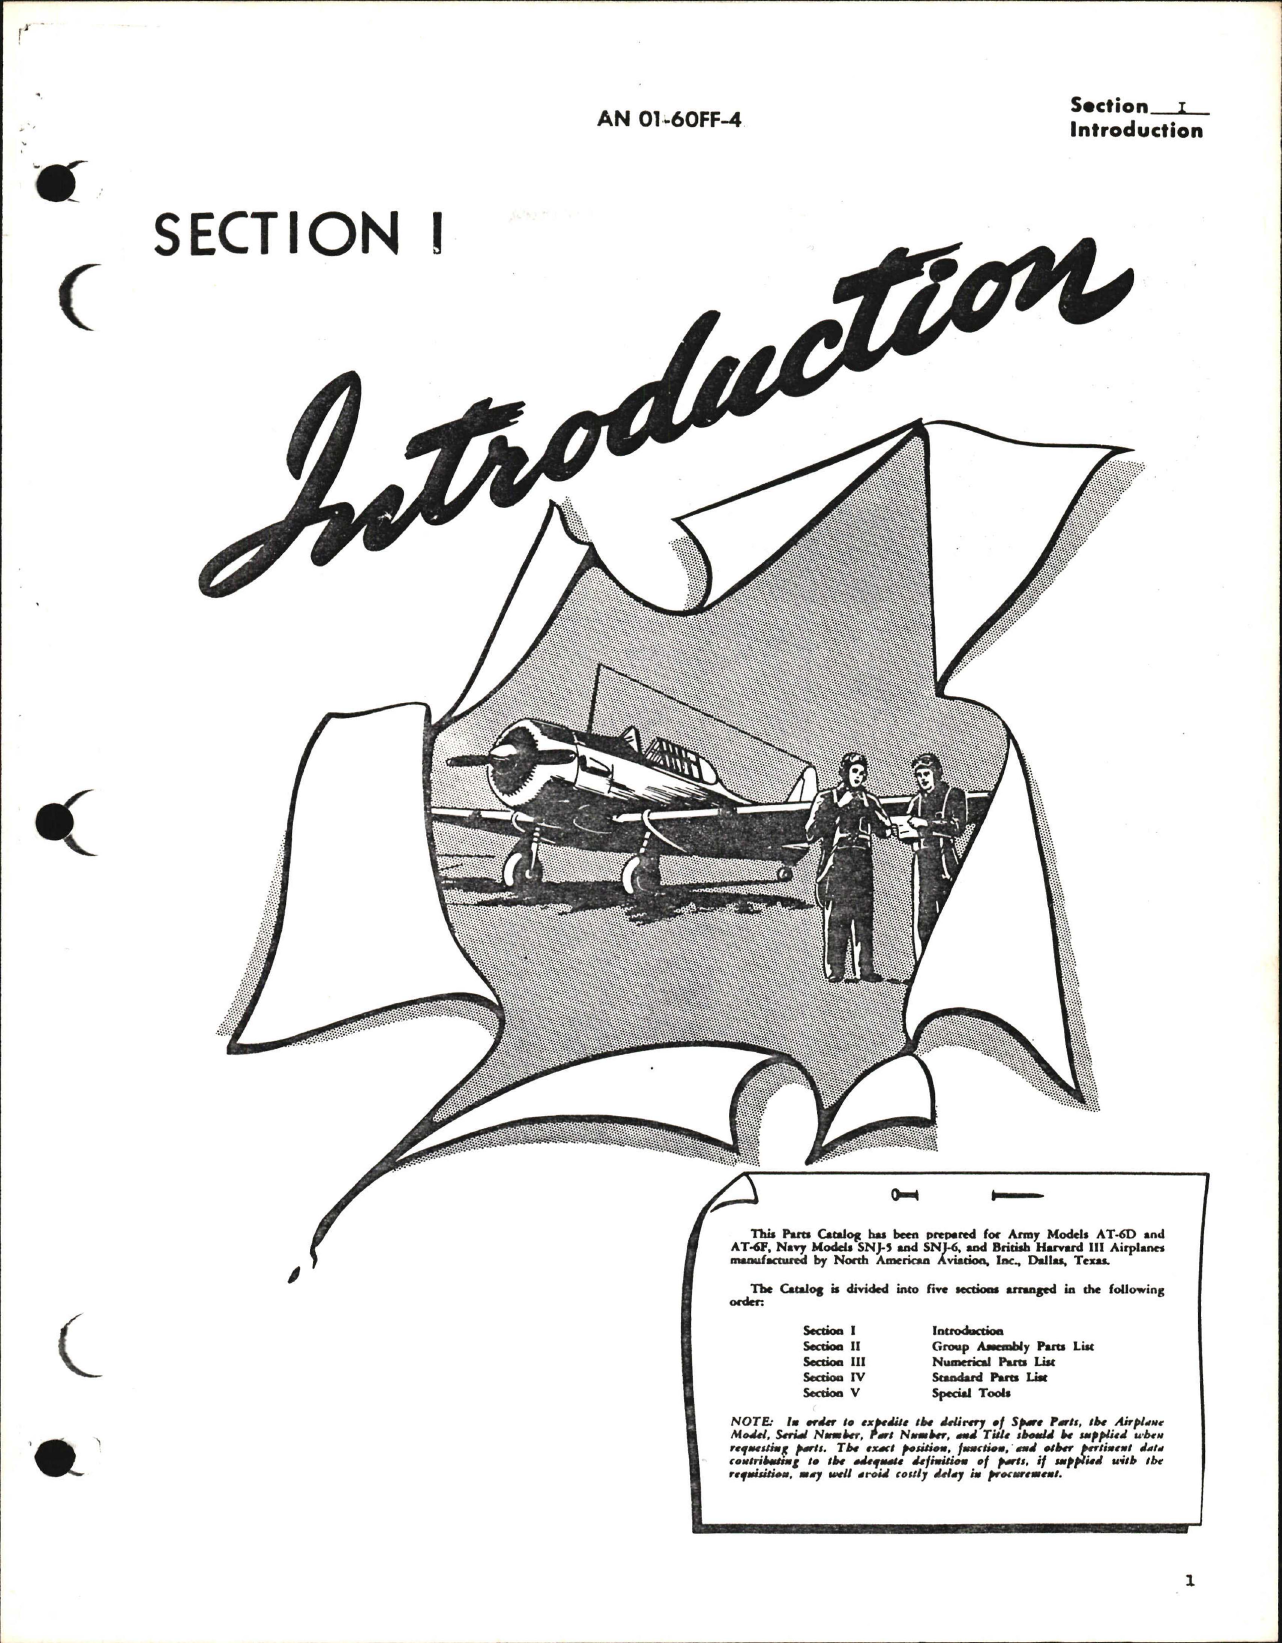 Sample page 5 from AirCorps Library document: Parts Catalog for T-6D, T-6F, AT-6D, AT-6F, SNJ-5, and SNJ-6